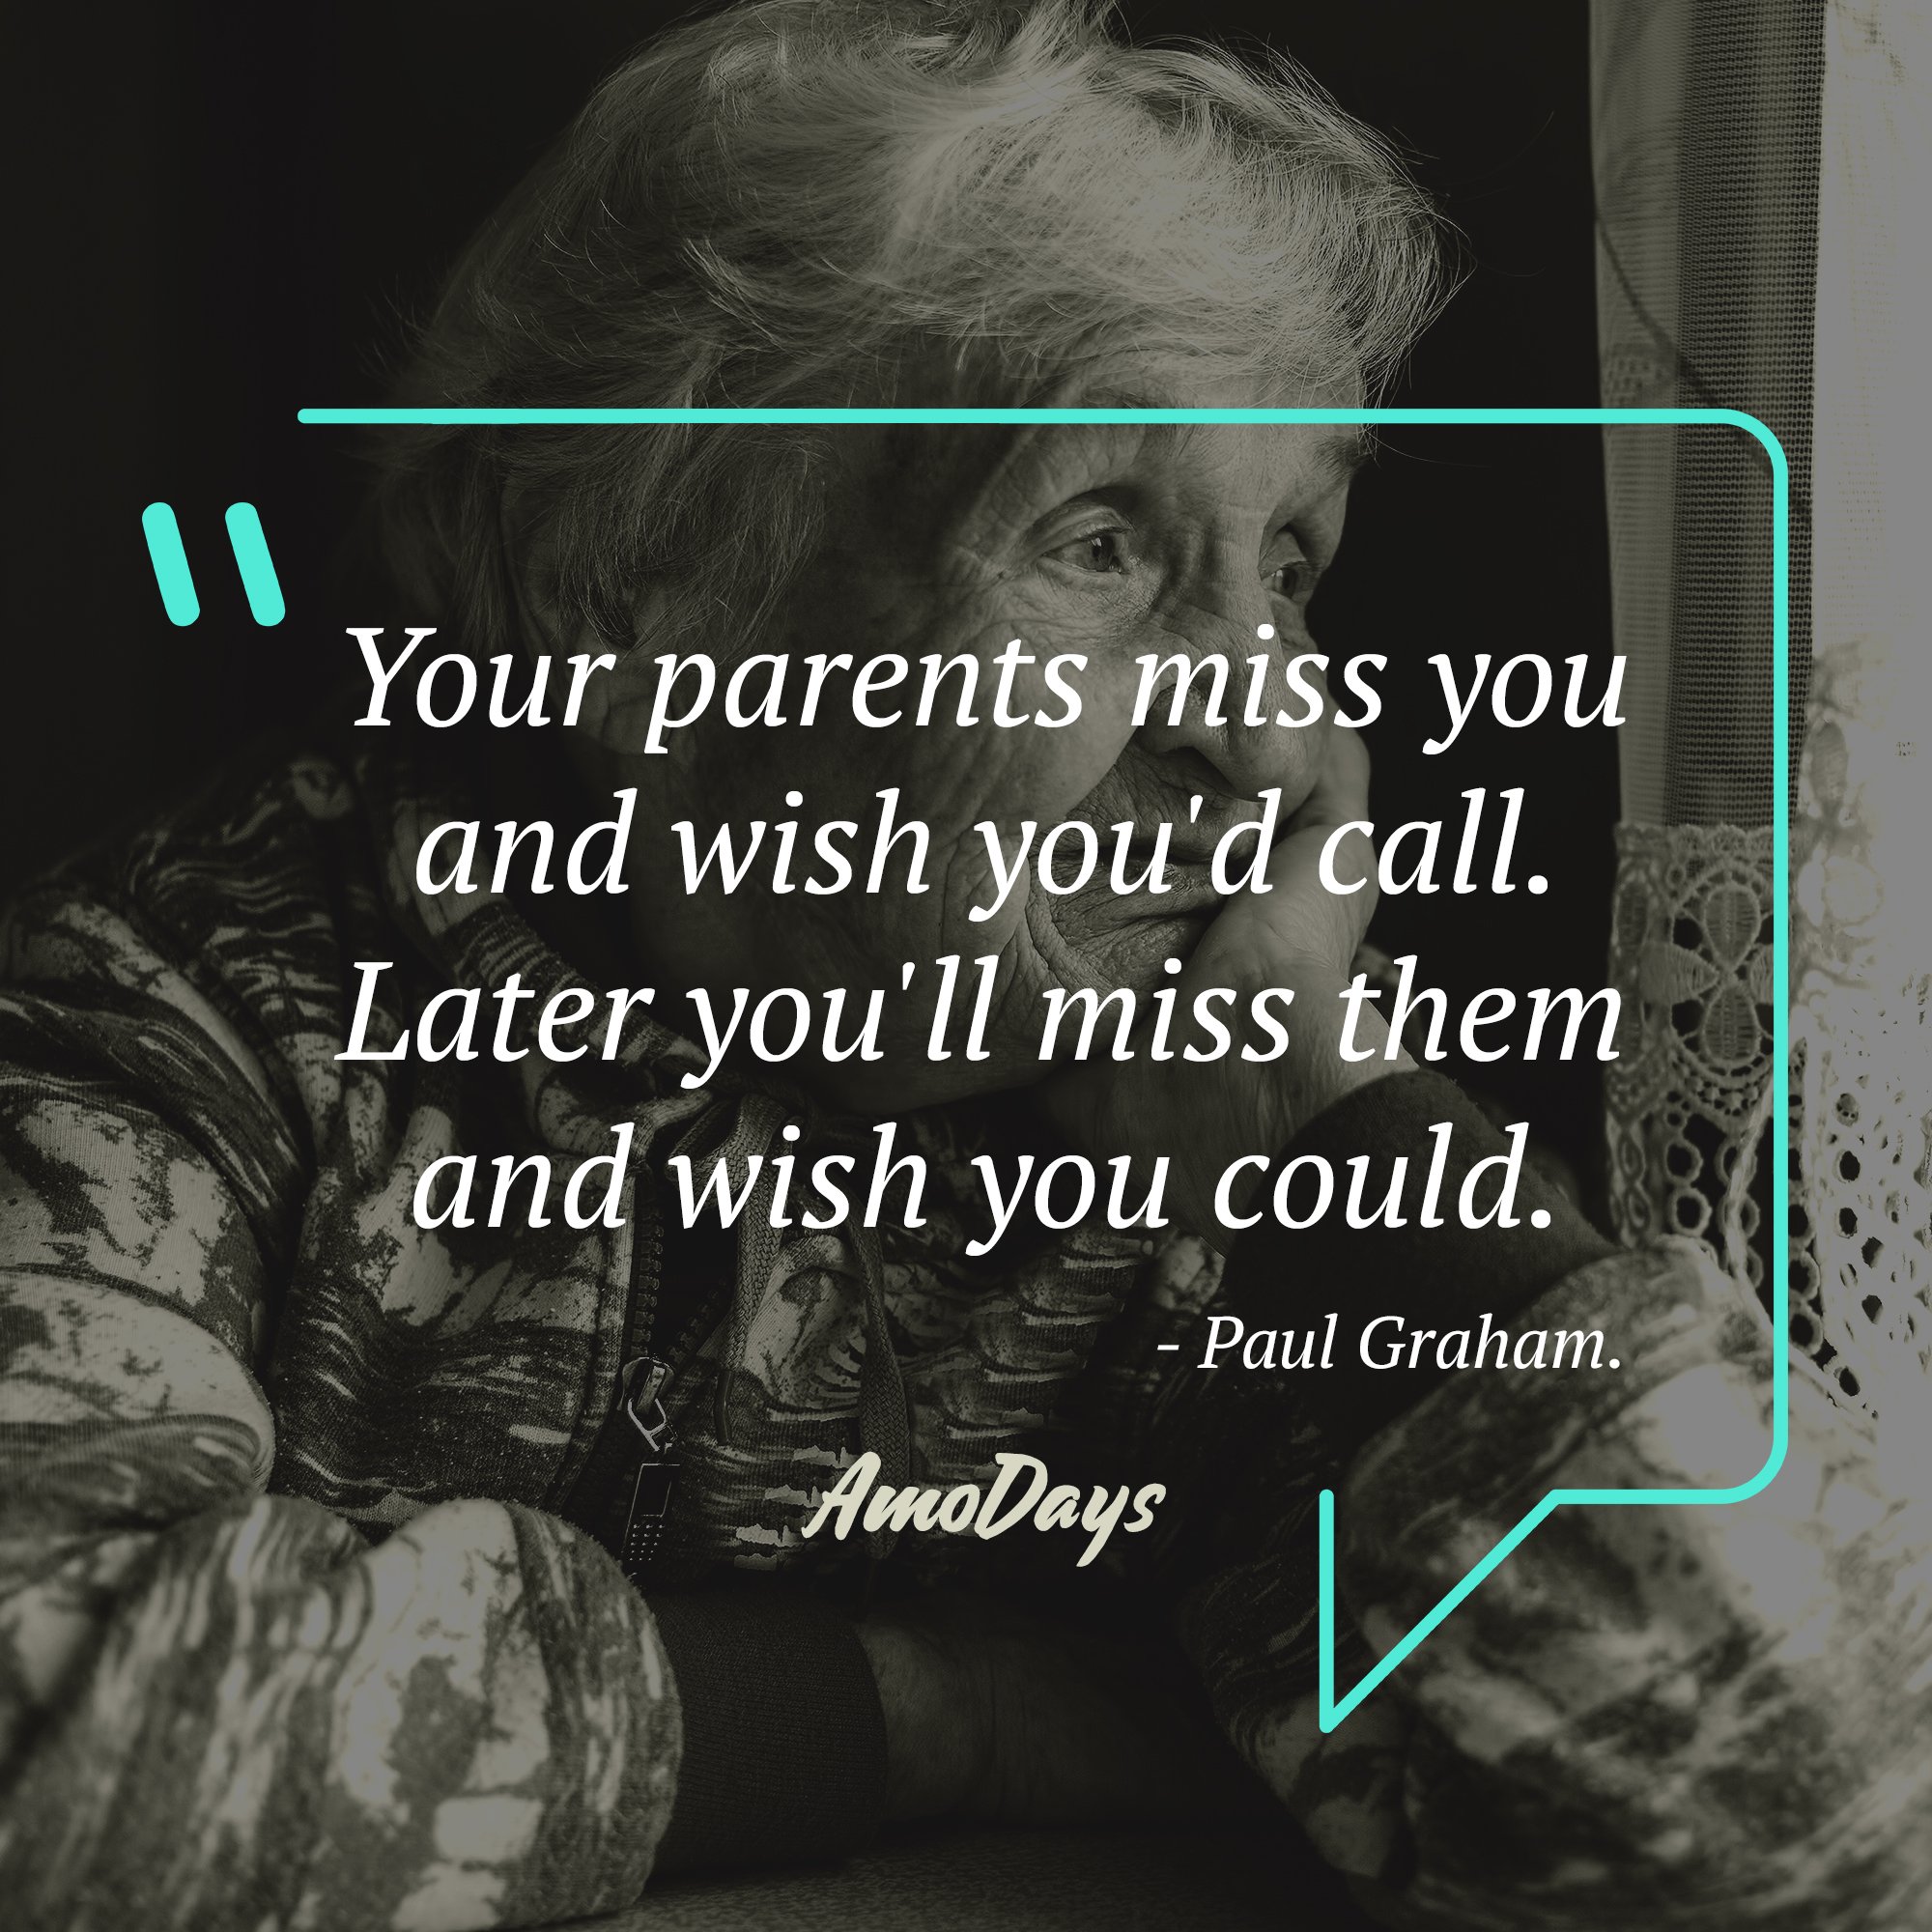 Paul Graham's quote "Your parents miss you and wish you’d call. Later you’ll miss them and wish you could." | Image: Amodays 